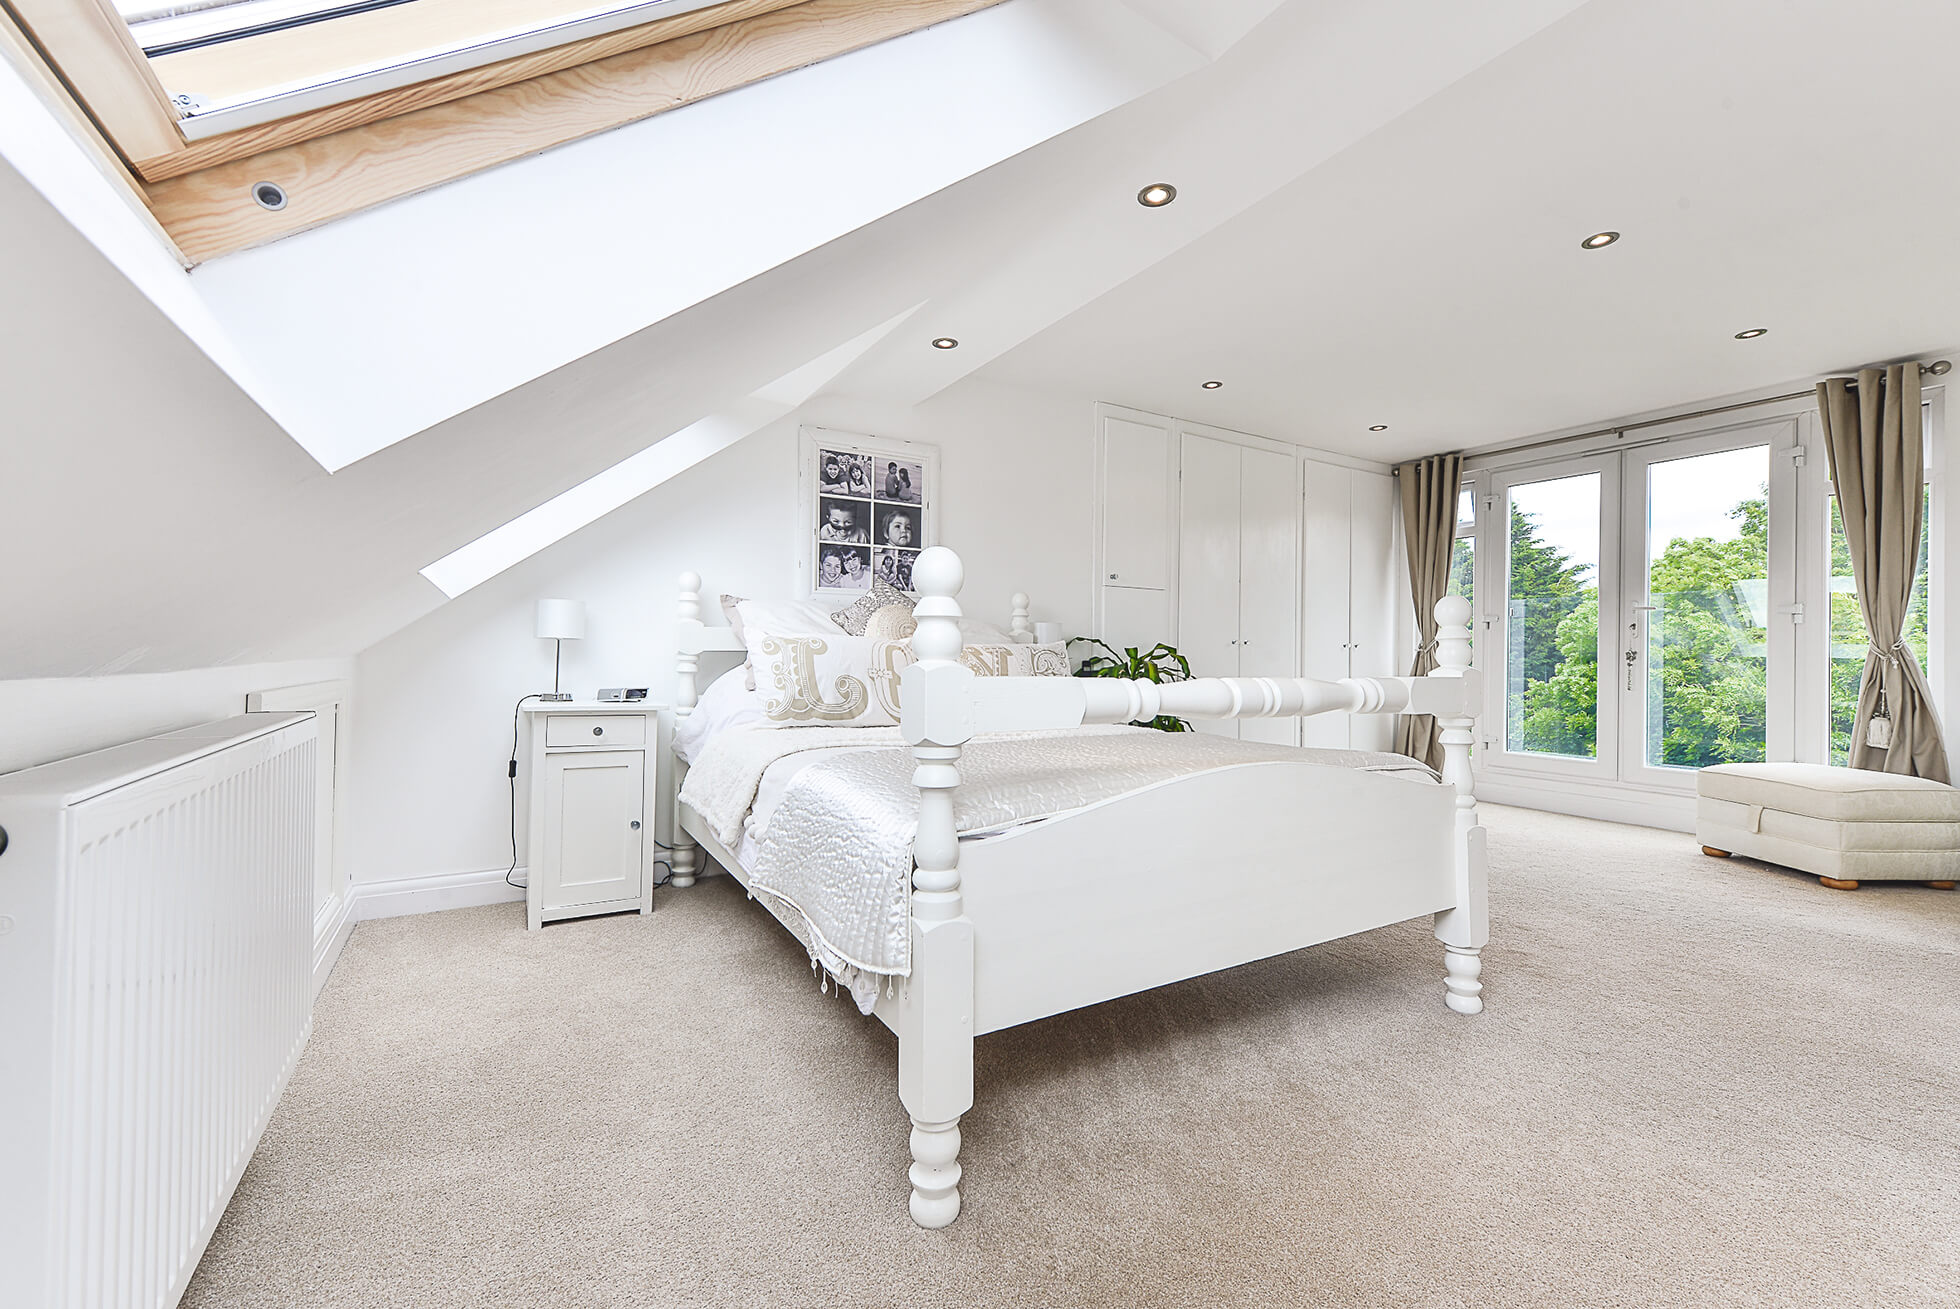 Do you have a question about converting your Loft in Oxhey? Here are the most popular questions asked by our clients.